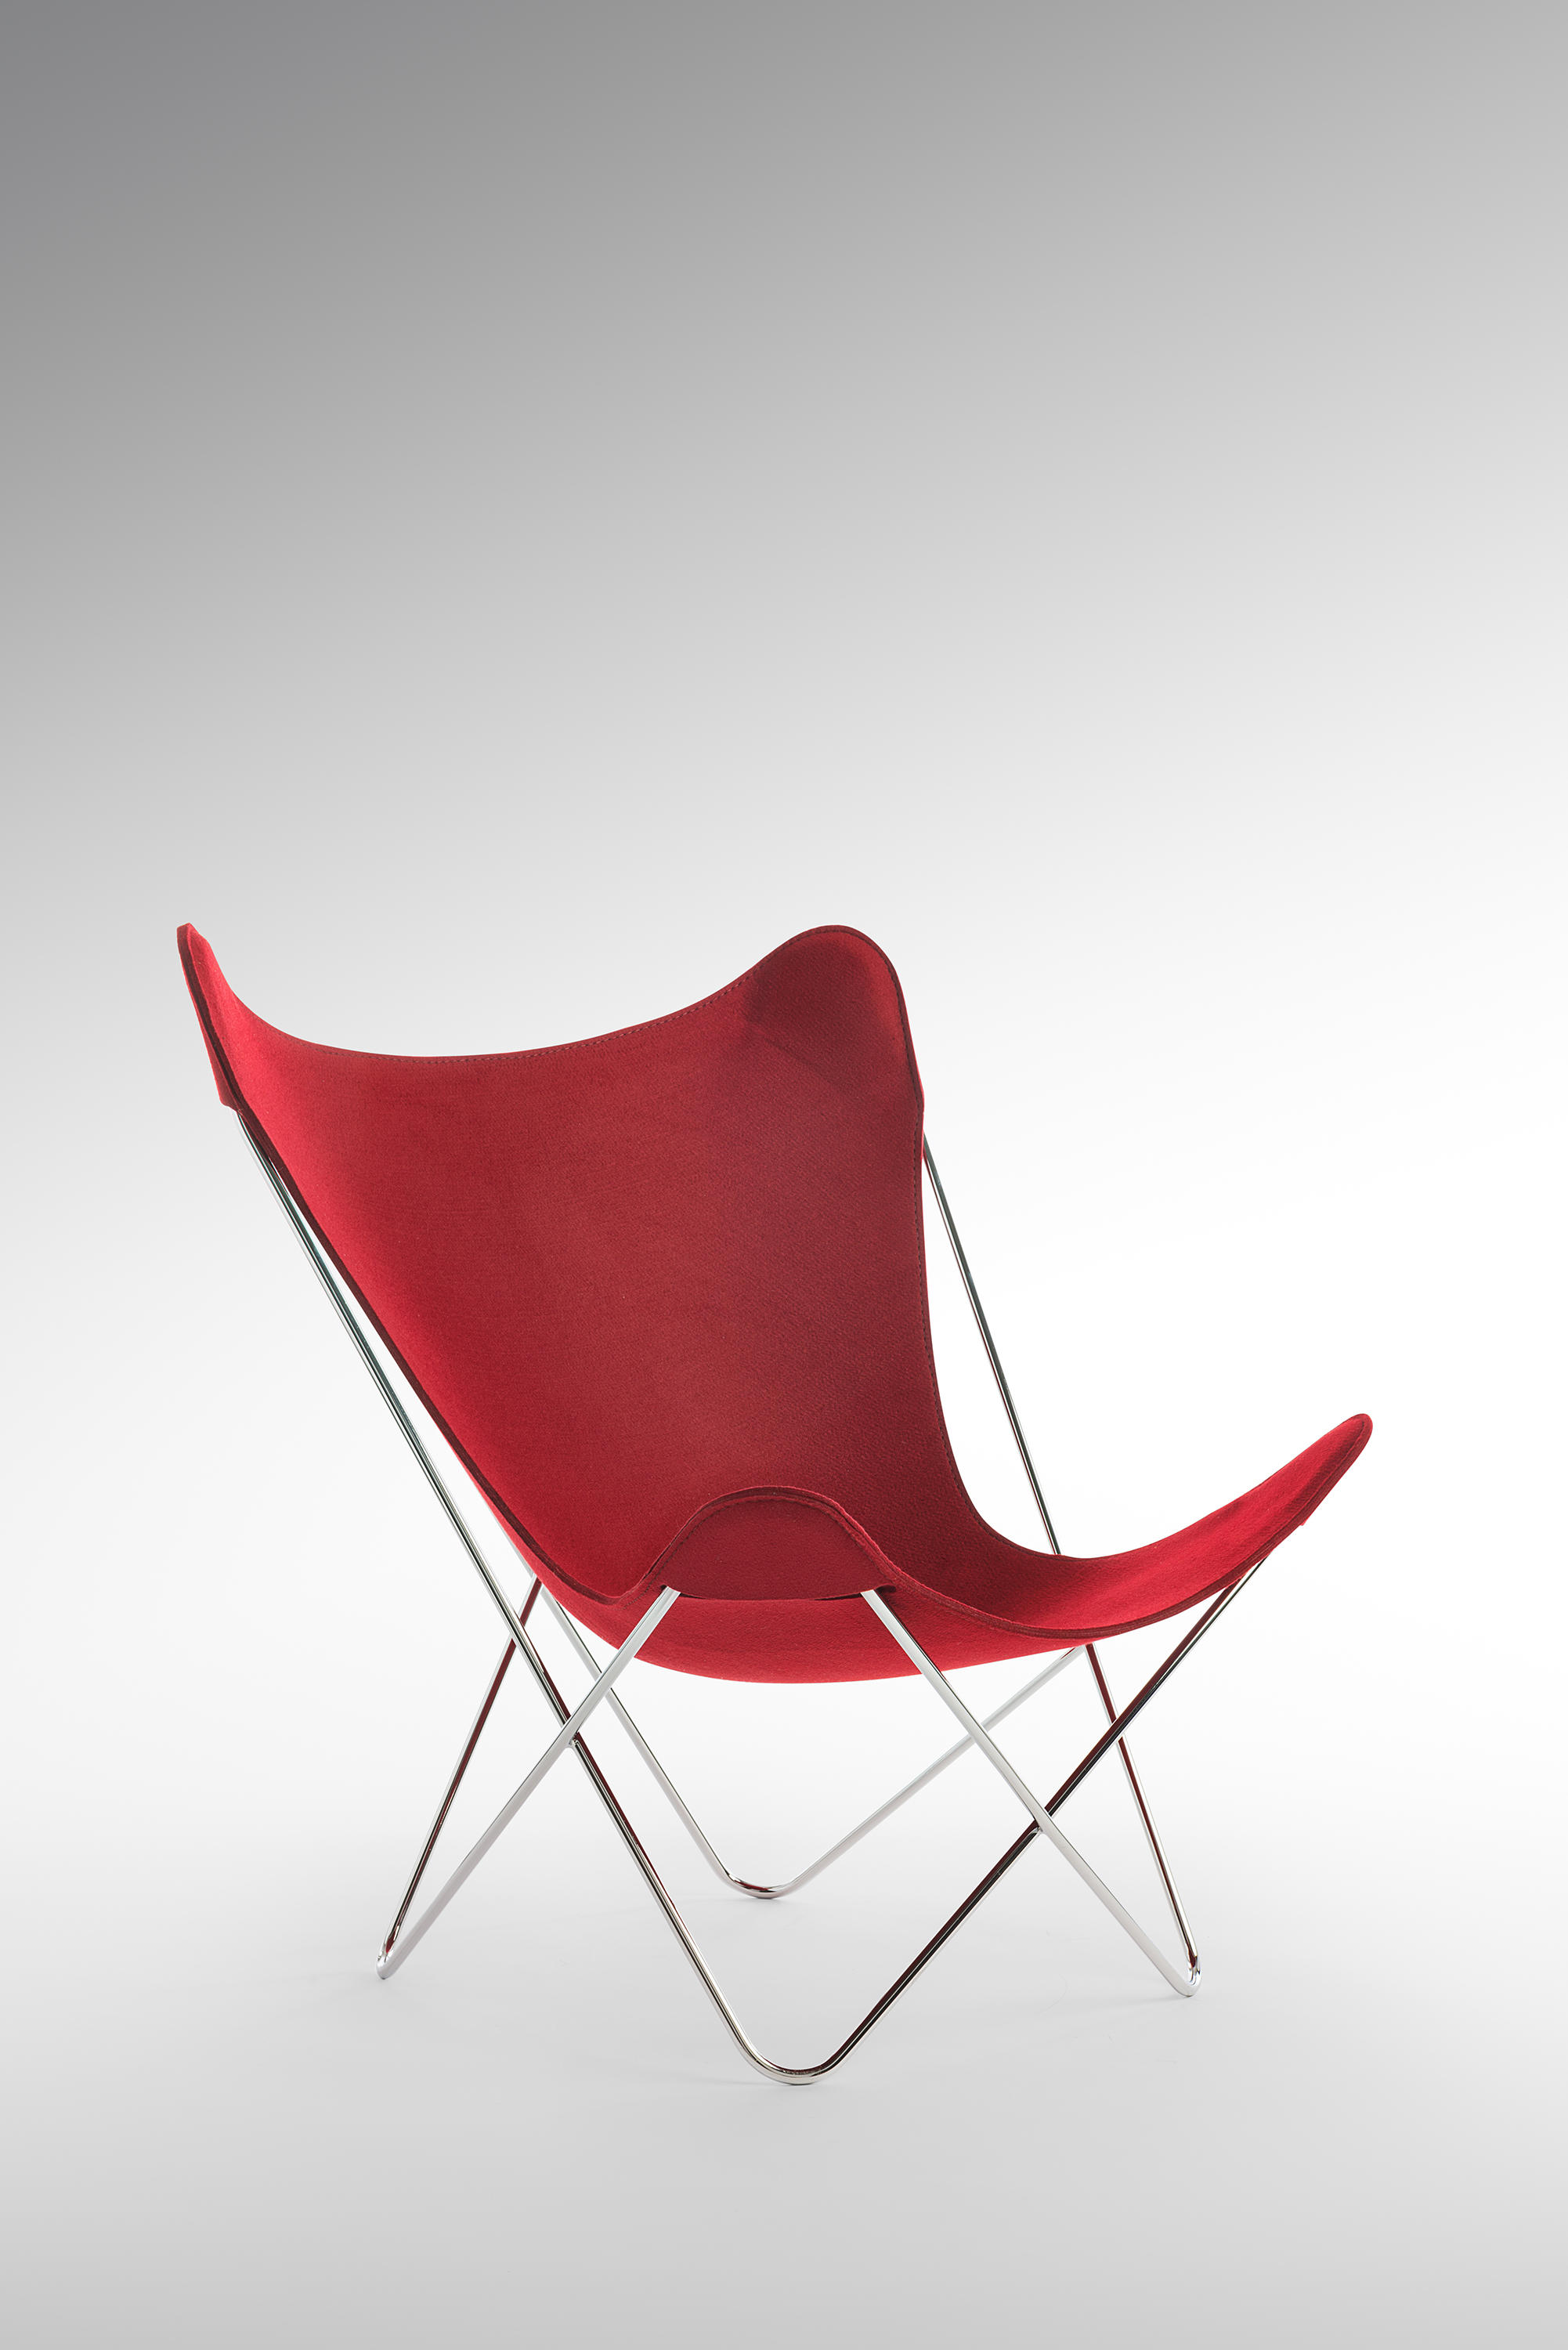 marc newson's aluminum chair for knoll honors mies van der rohe